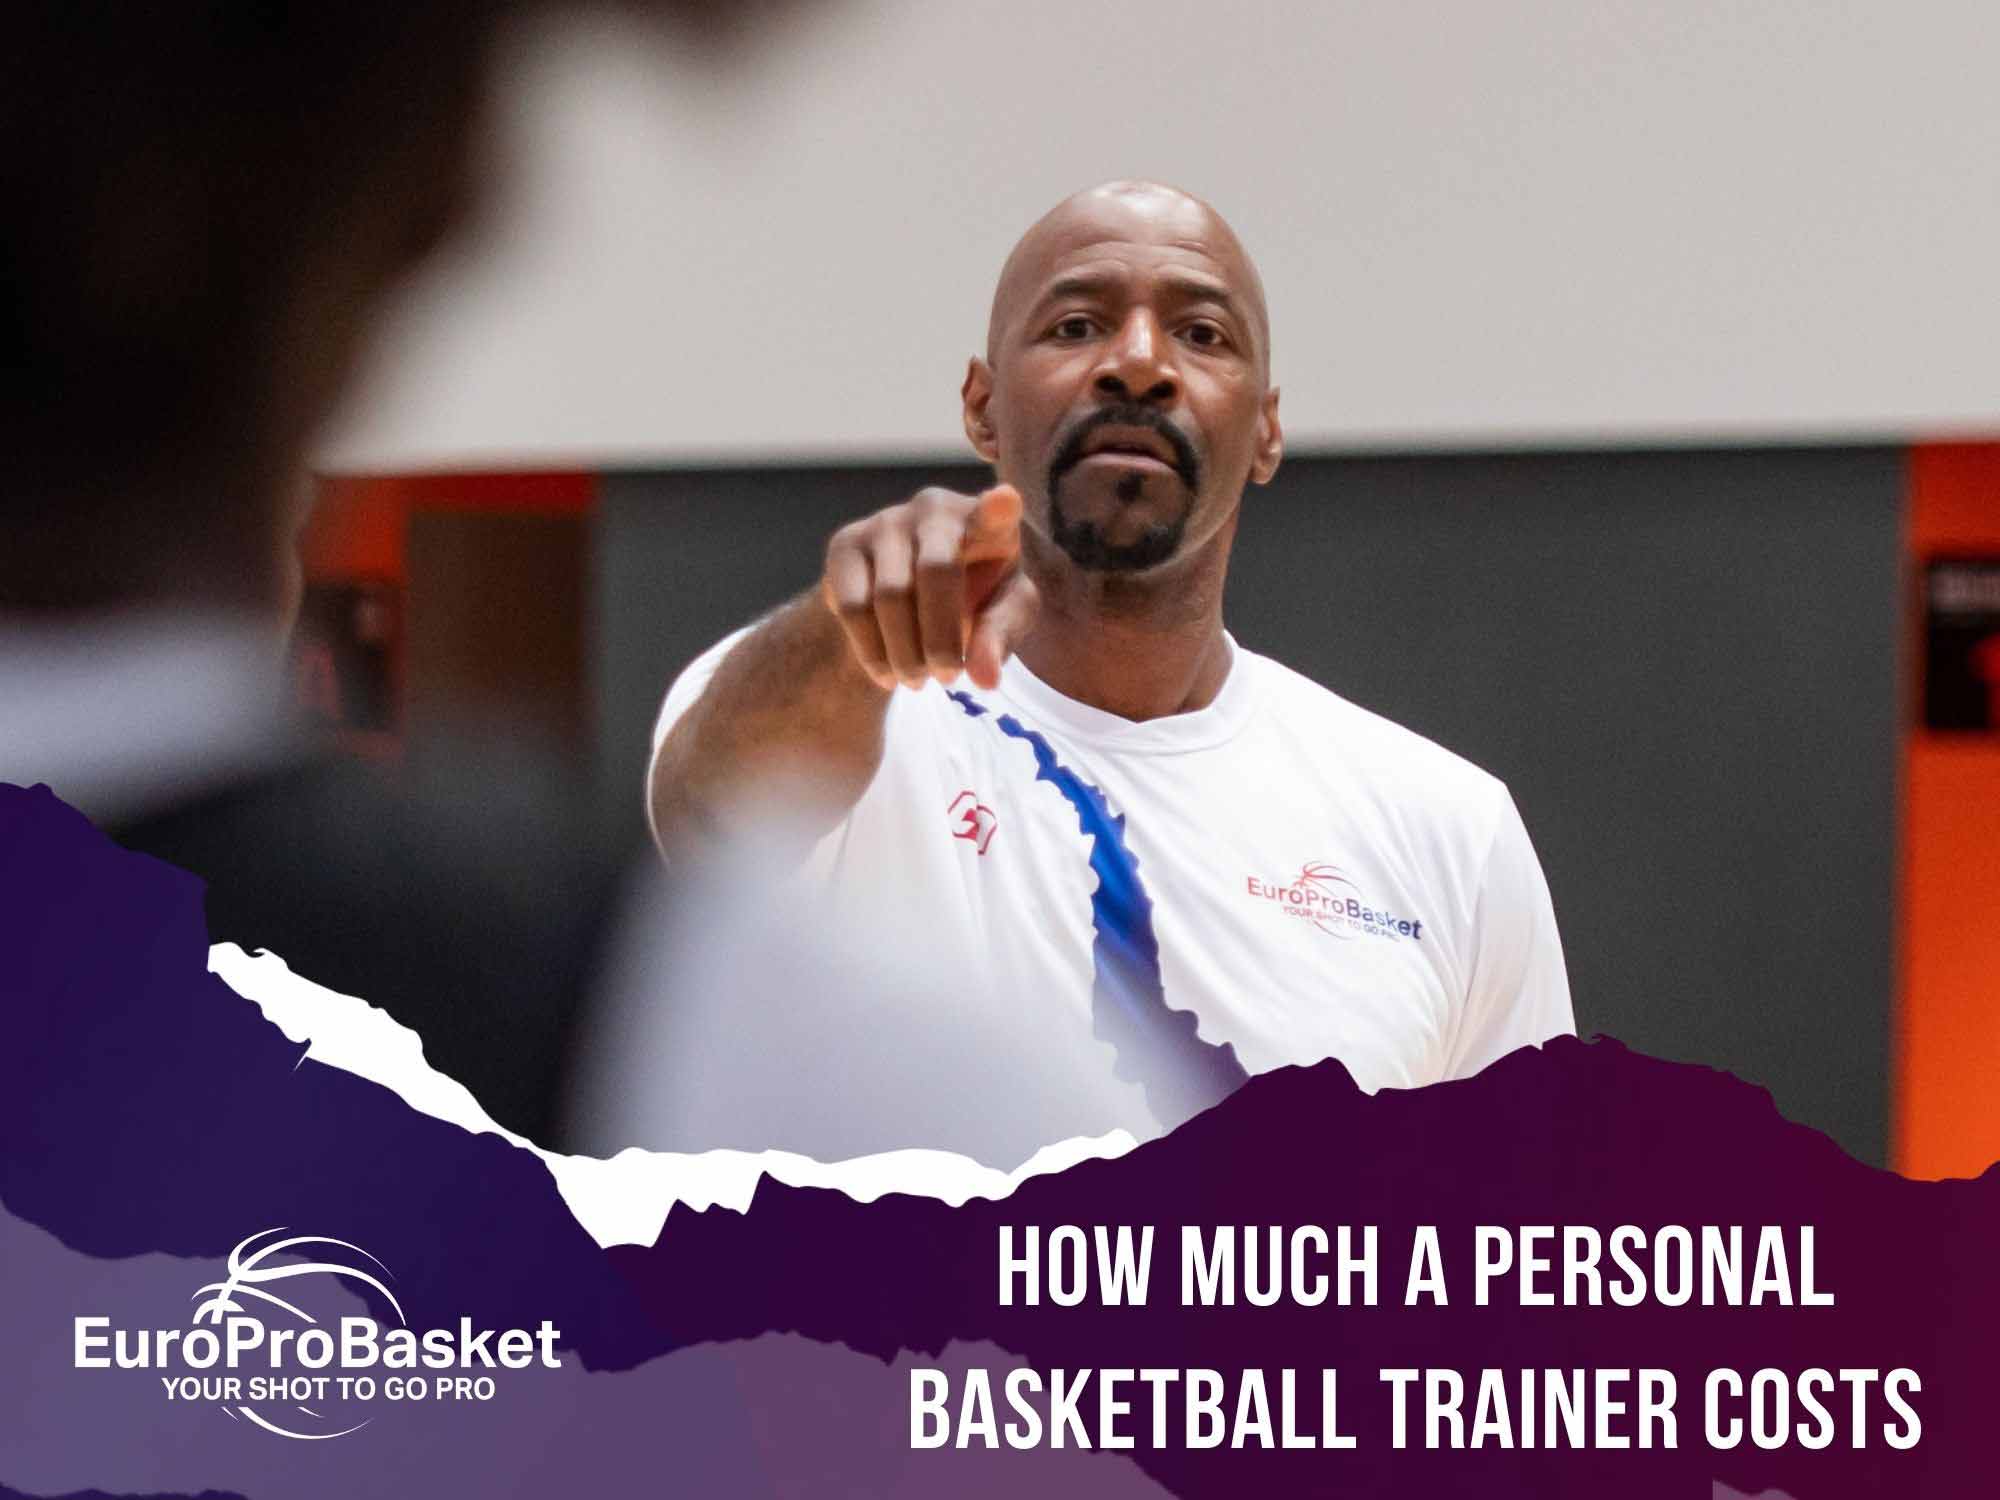 How much does a personal basketball trainer cost